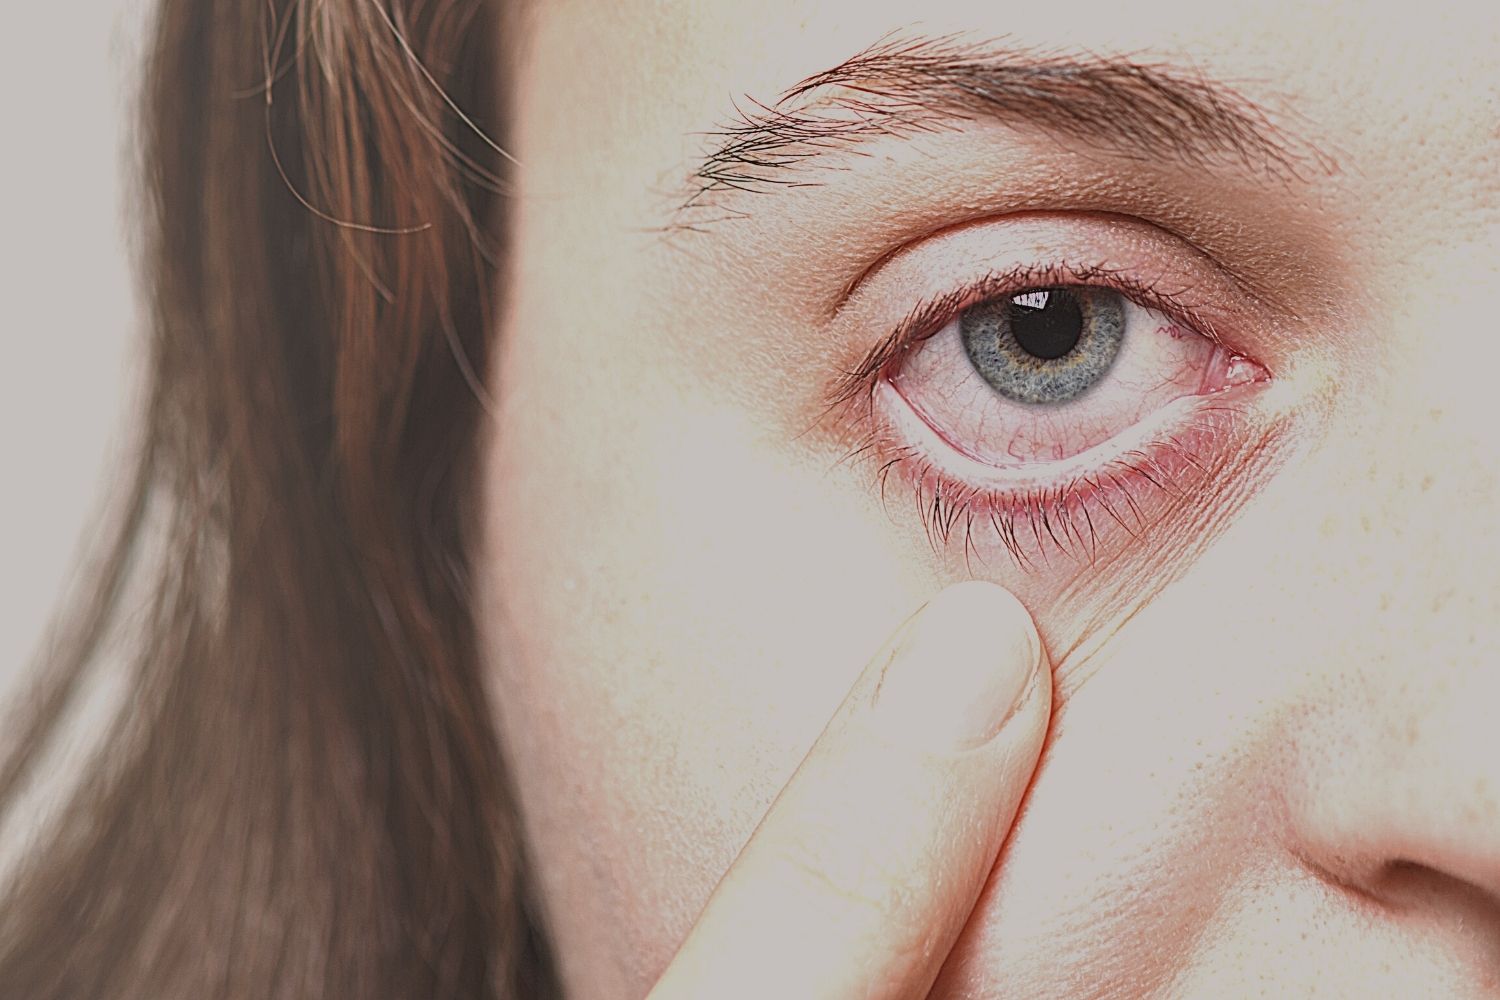 sleeping with contact lenses may causes keratitis